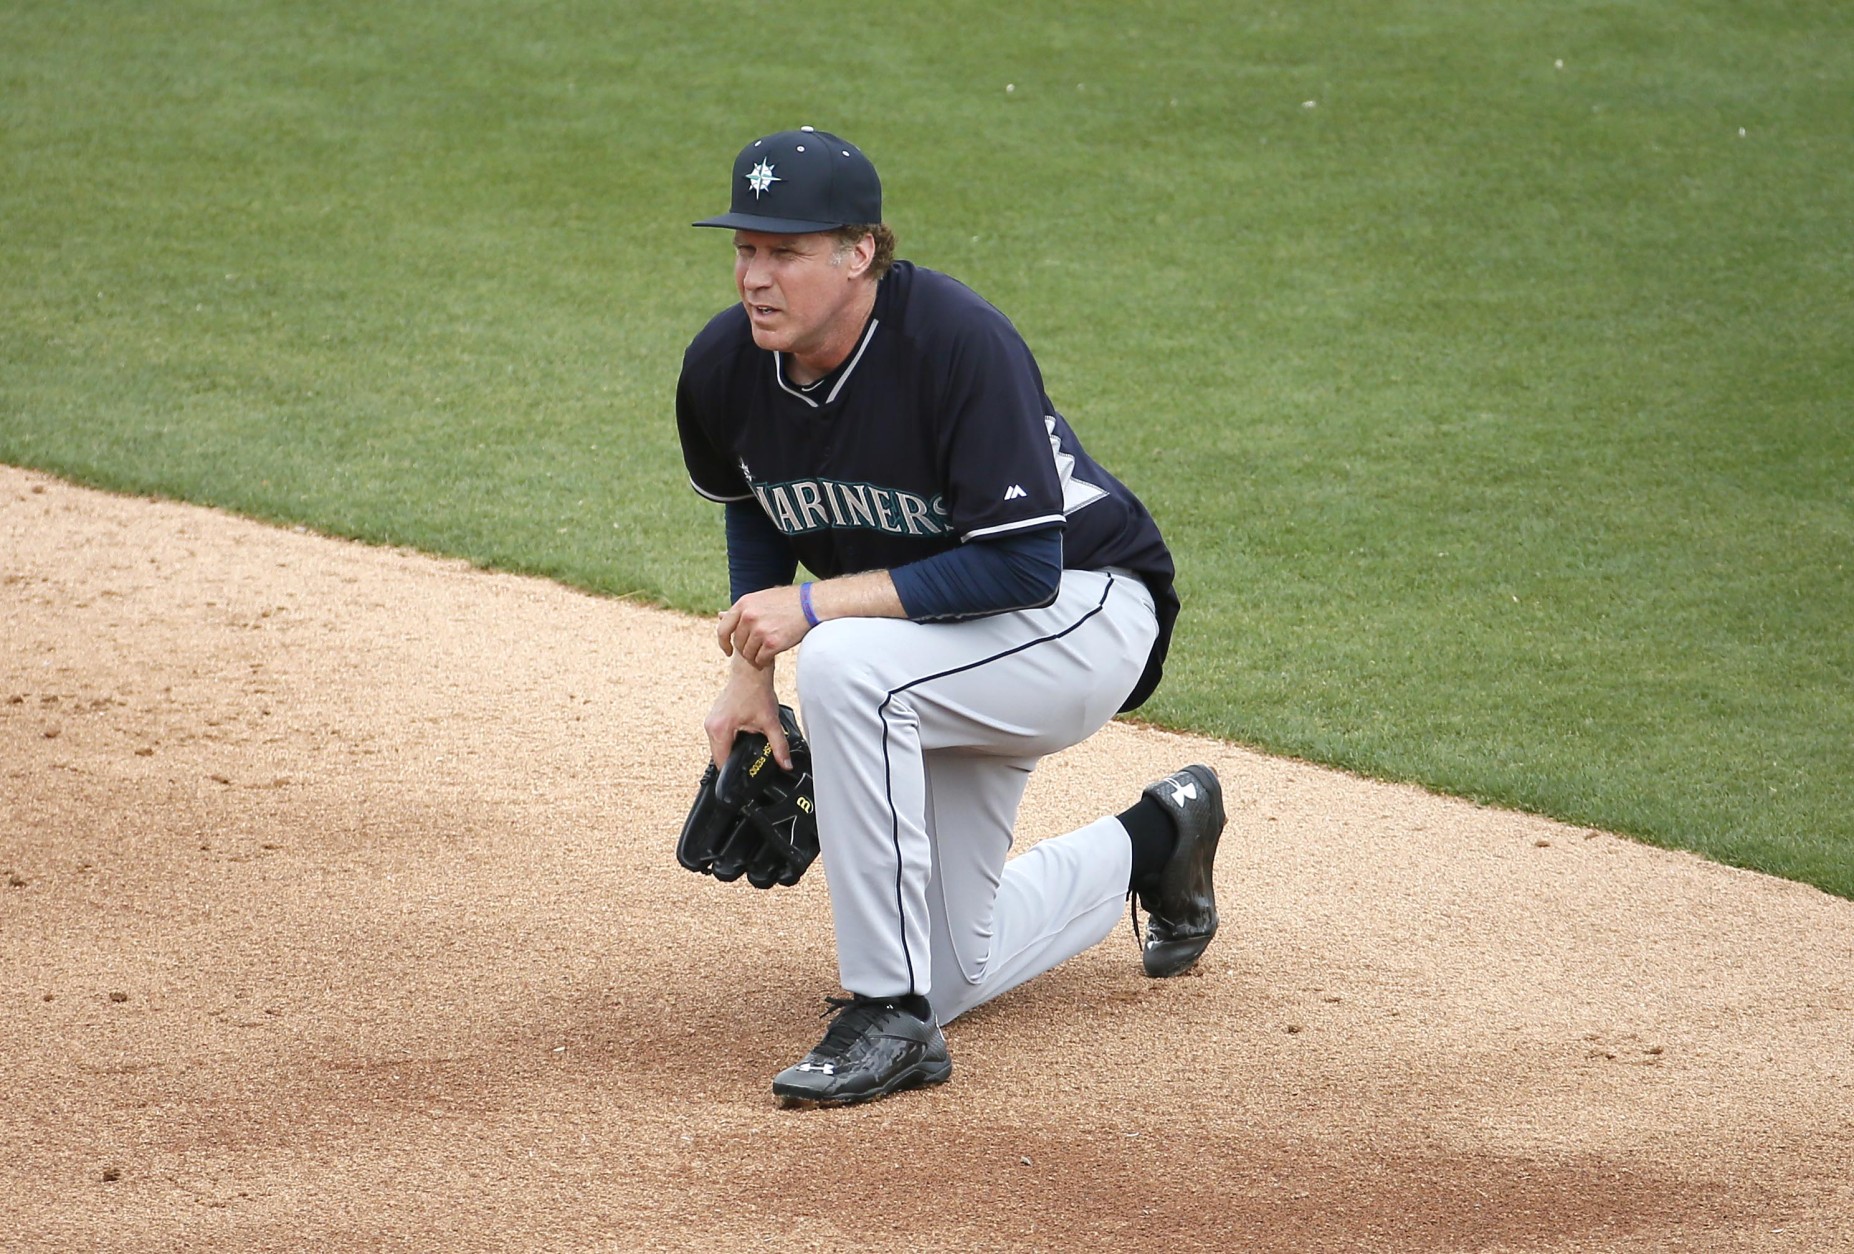 Actor Will Ferrell takes a knee while playing second base for the Seattle Mariners during the second inning of a spring training baseball game against the Oakland A's, Thursday, March 12, 2015, in Mesa, Ariz. Ferrell is filming a new special from Funny Or Die, in partnership with Major League Baseball, to air exclusively on HBO later this year. (AP Photo/Matt York)